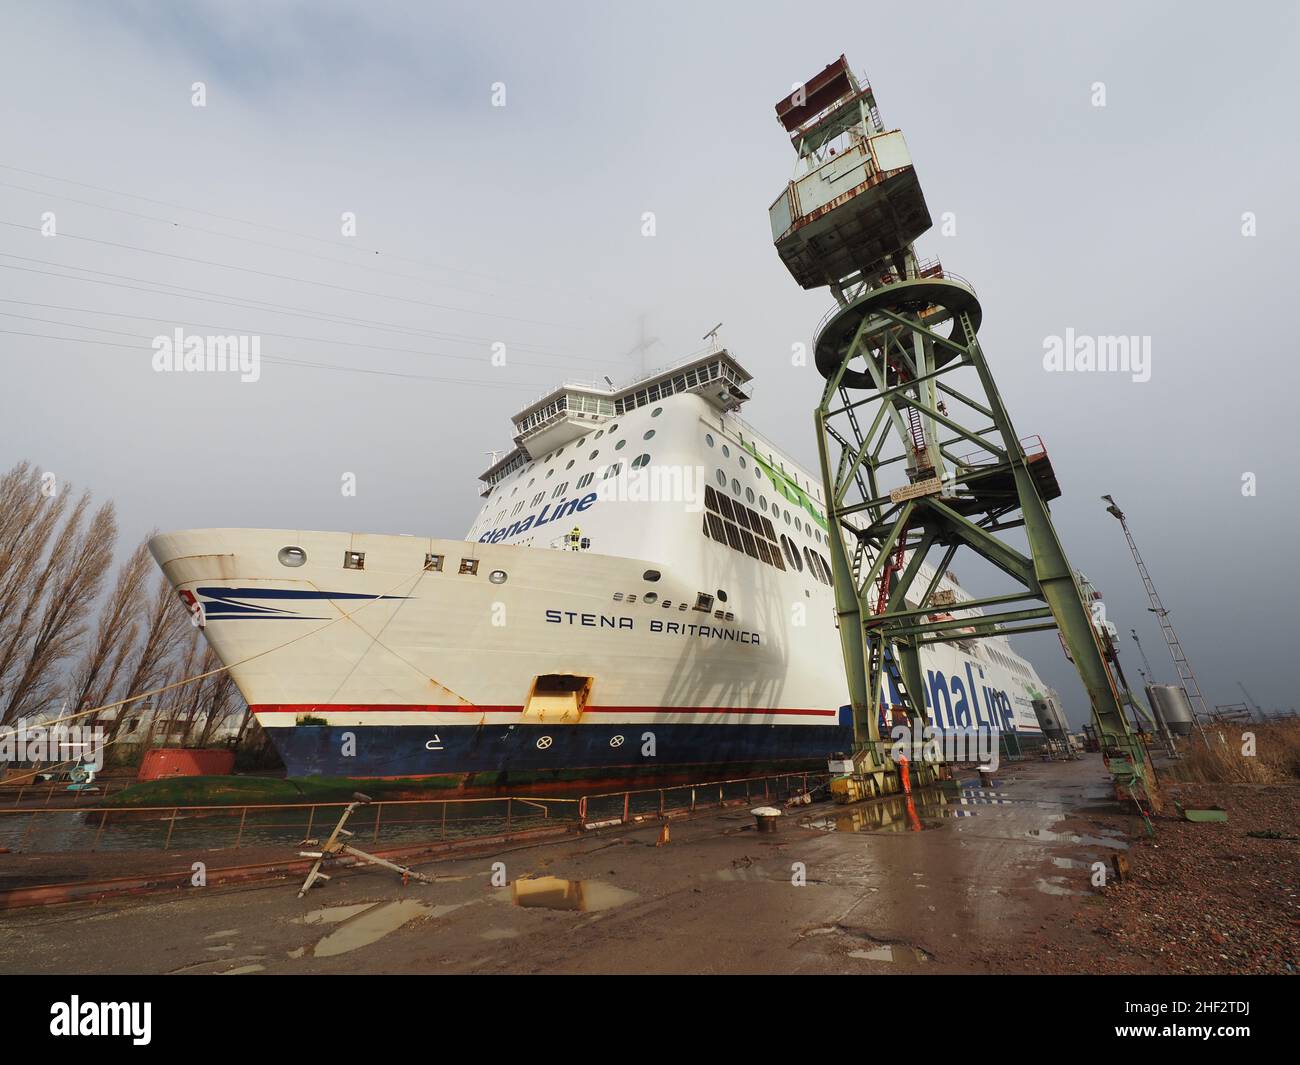 Stena Line ferry Stena Brittanica being pulled into a dry dock in the port of Antwerp, Belgium Stock Photo